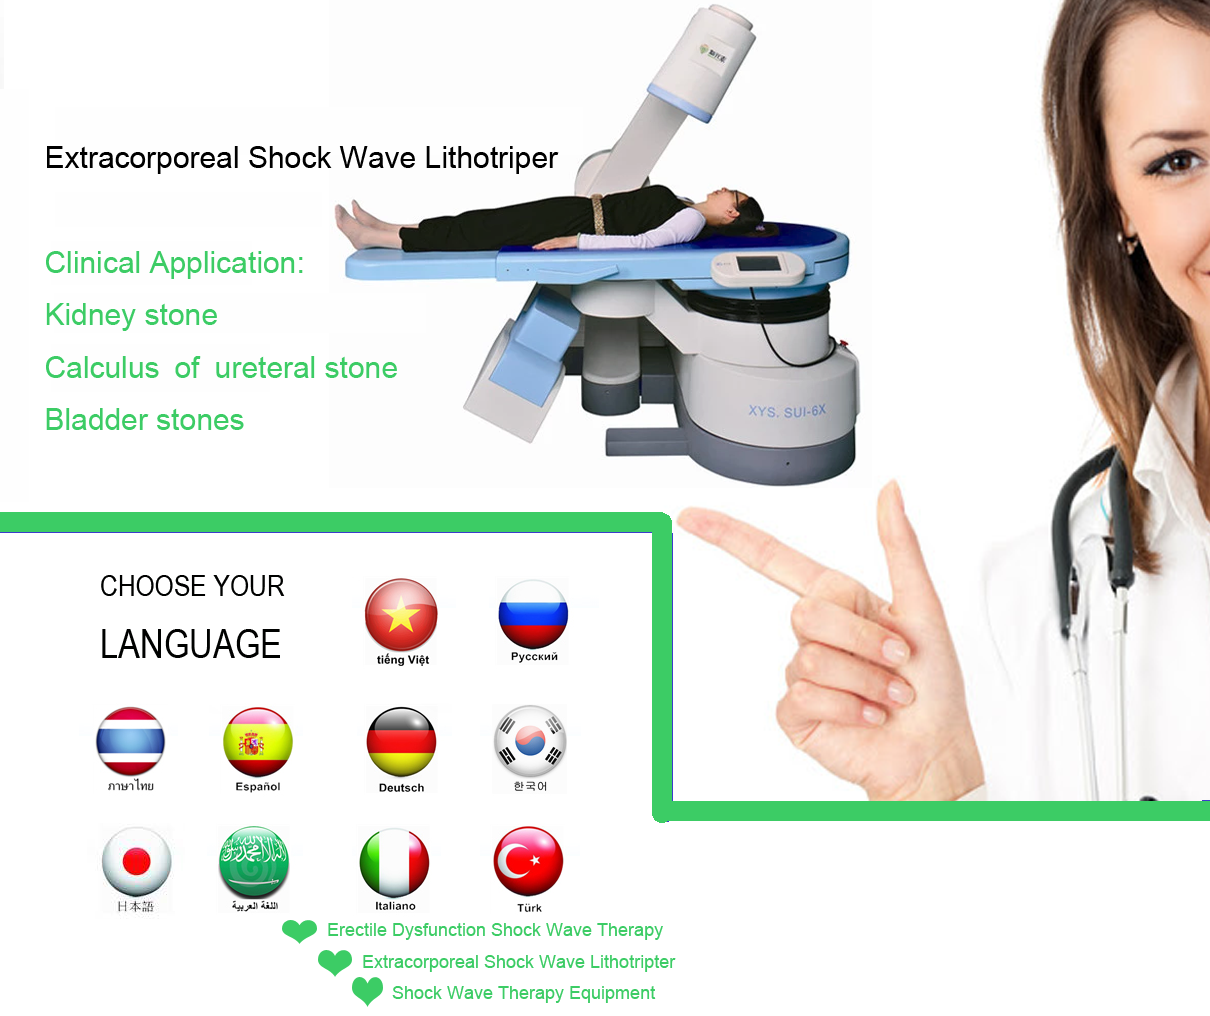 ElecElectromagnetic extracorporeal shock wave lithotripter XYS.SUI-5Xtromagnetic extracorporeal shock wave lithotripter XYS.SUI-5X